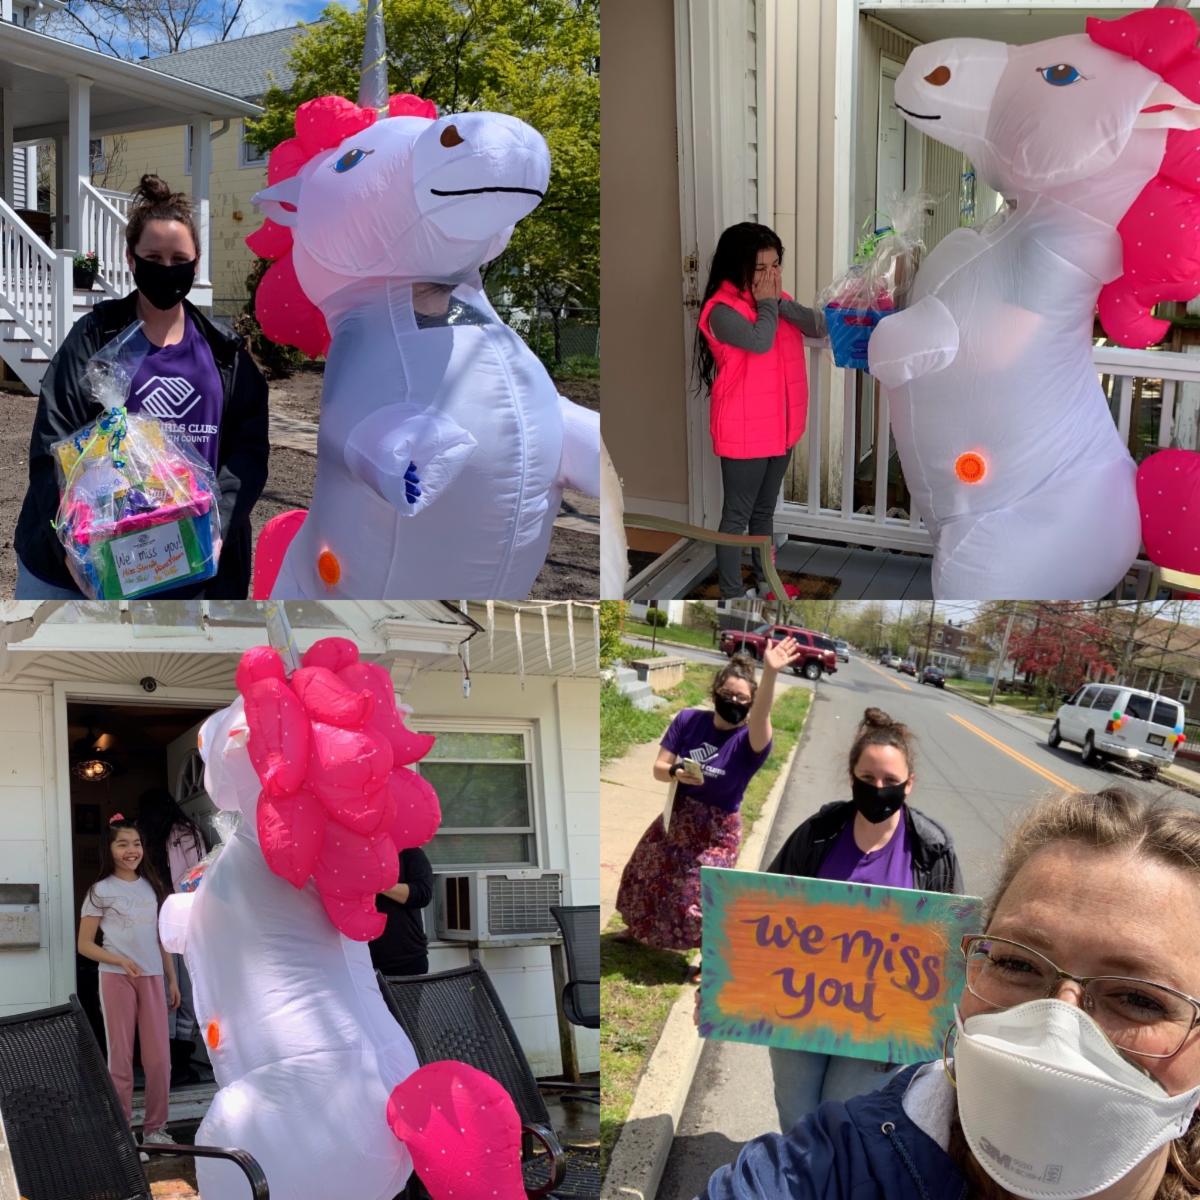 We Miss You Photo Collage of Unicorn Handing Out Supplies to Members